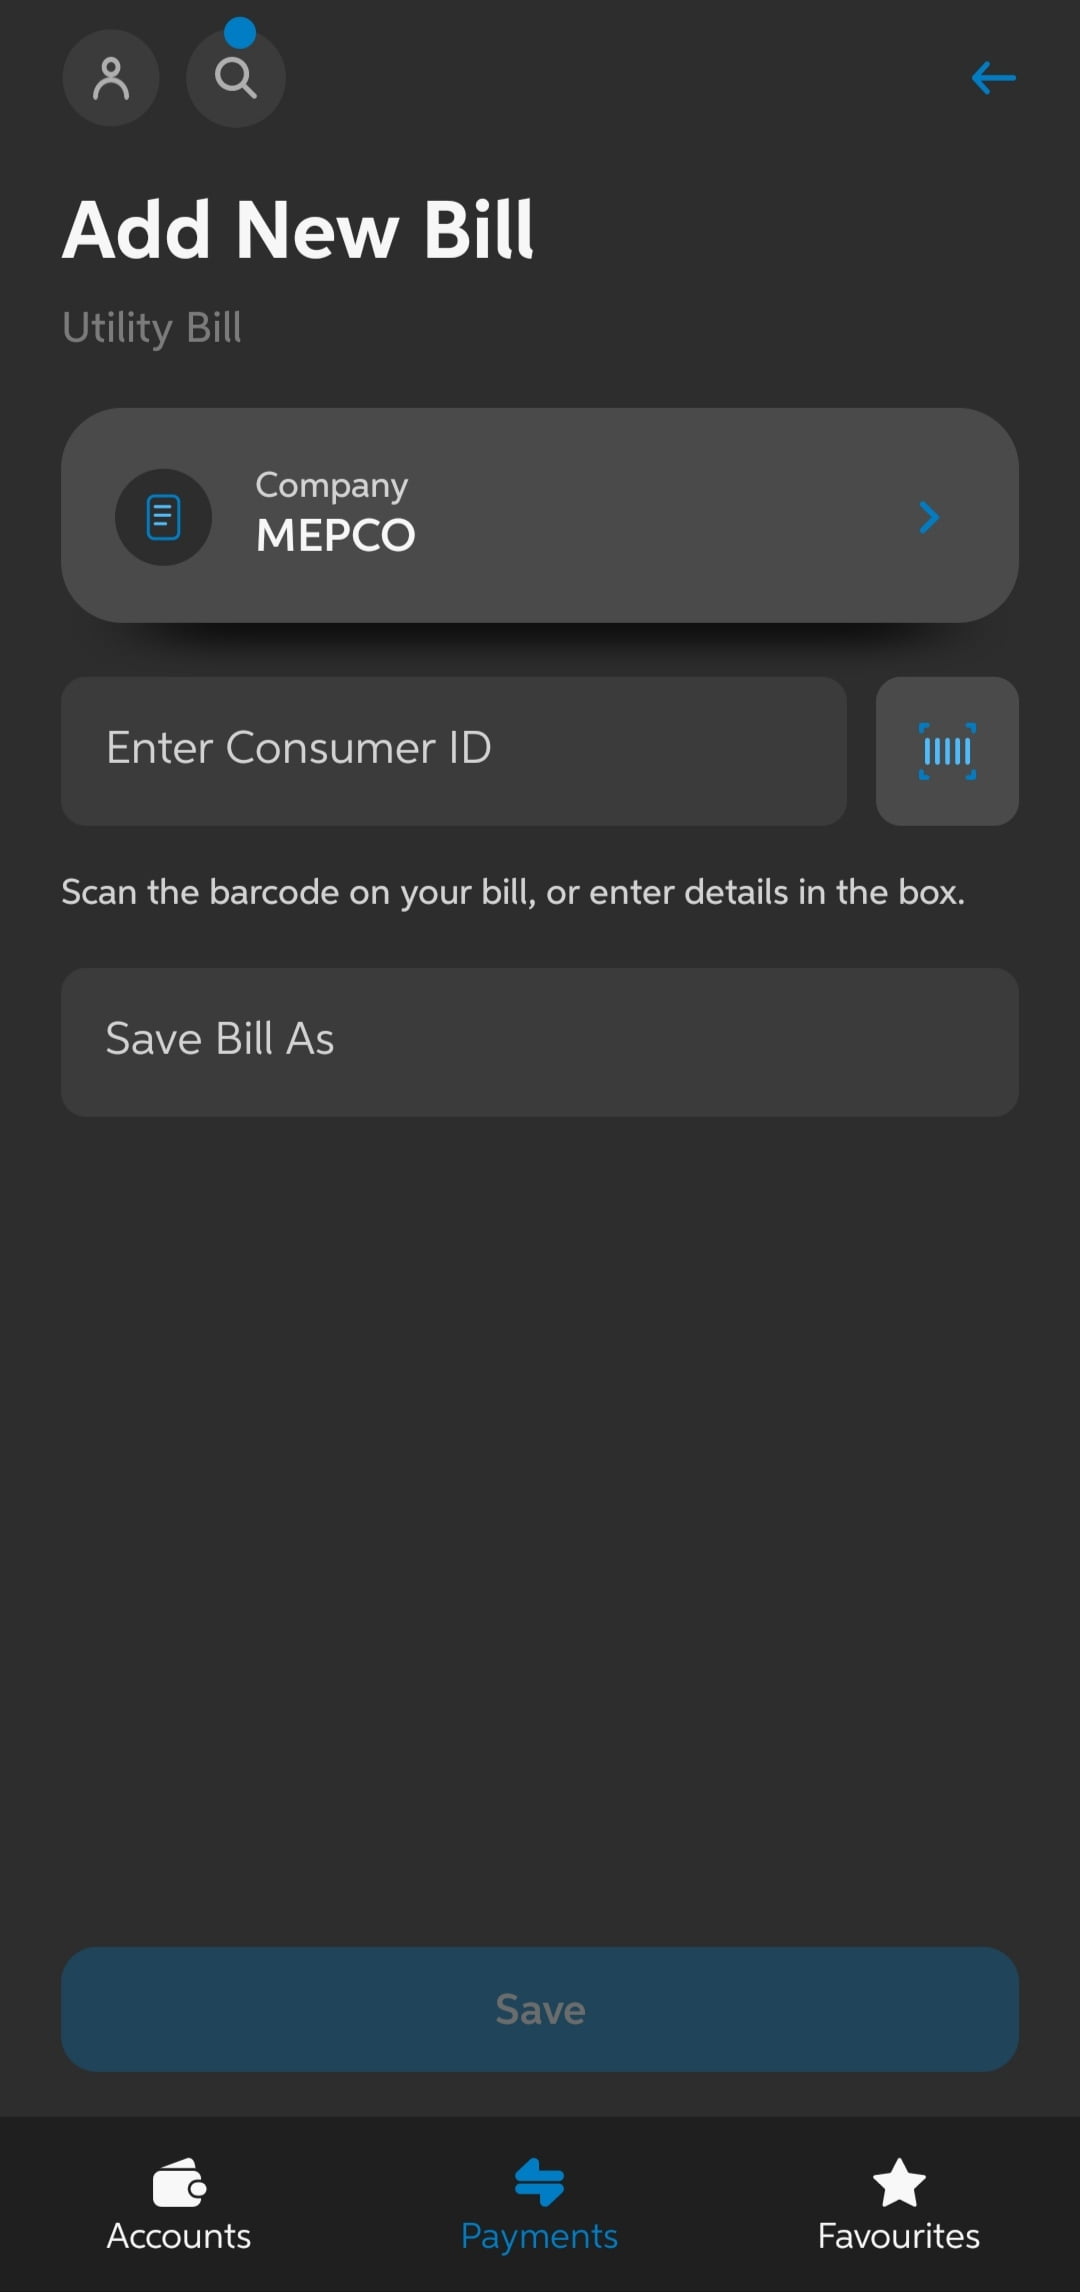 How to pay MEPCO bill with UBL app?